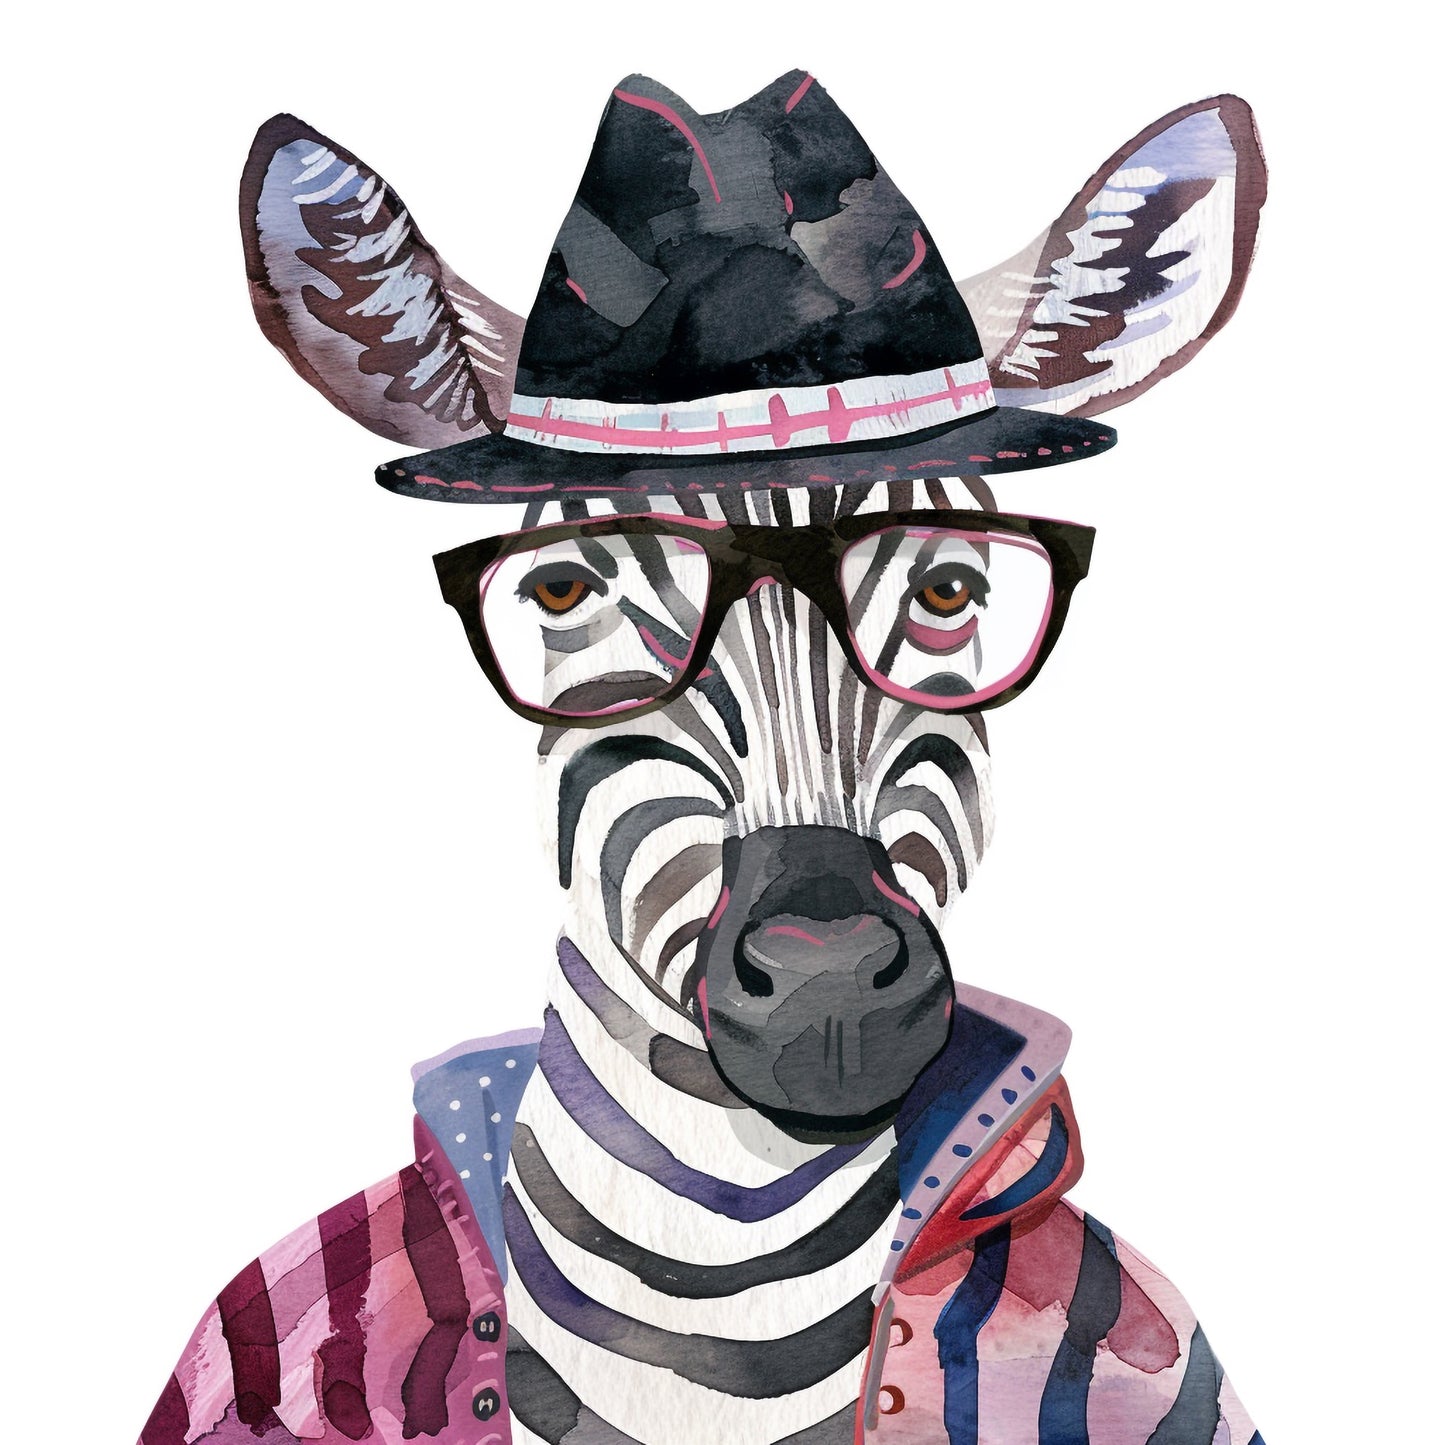 Stylish Zebra in Retro Outfit and Cool Hat Illustration